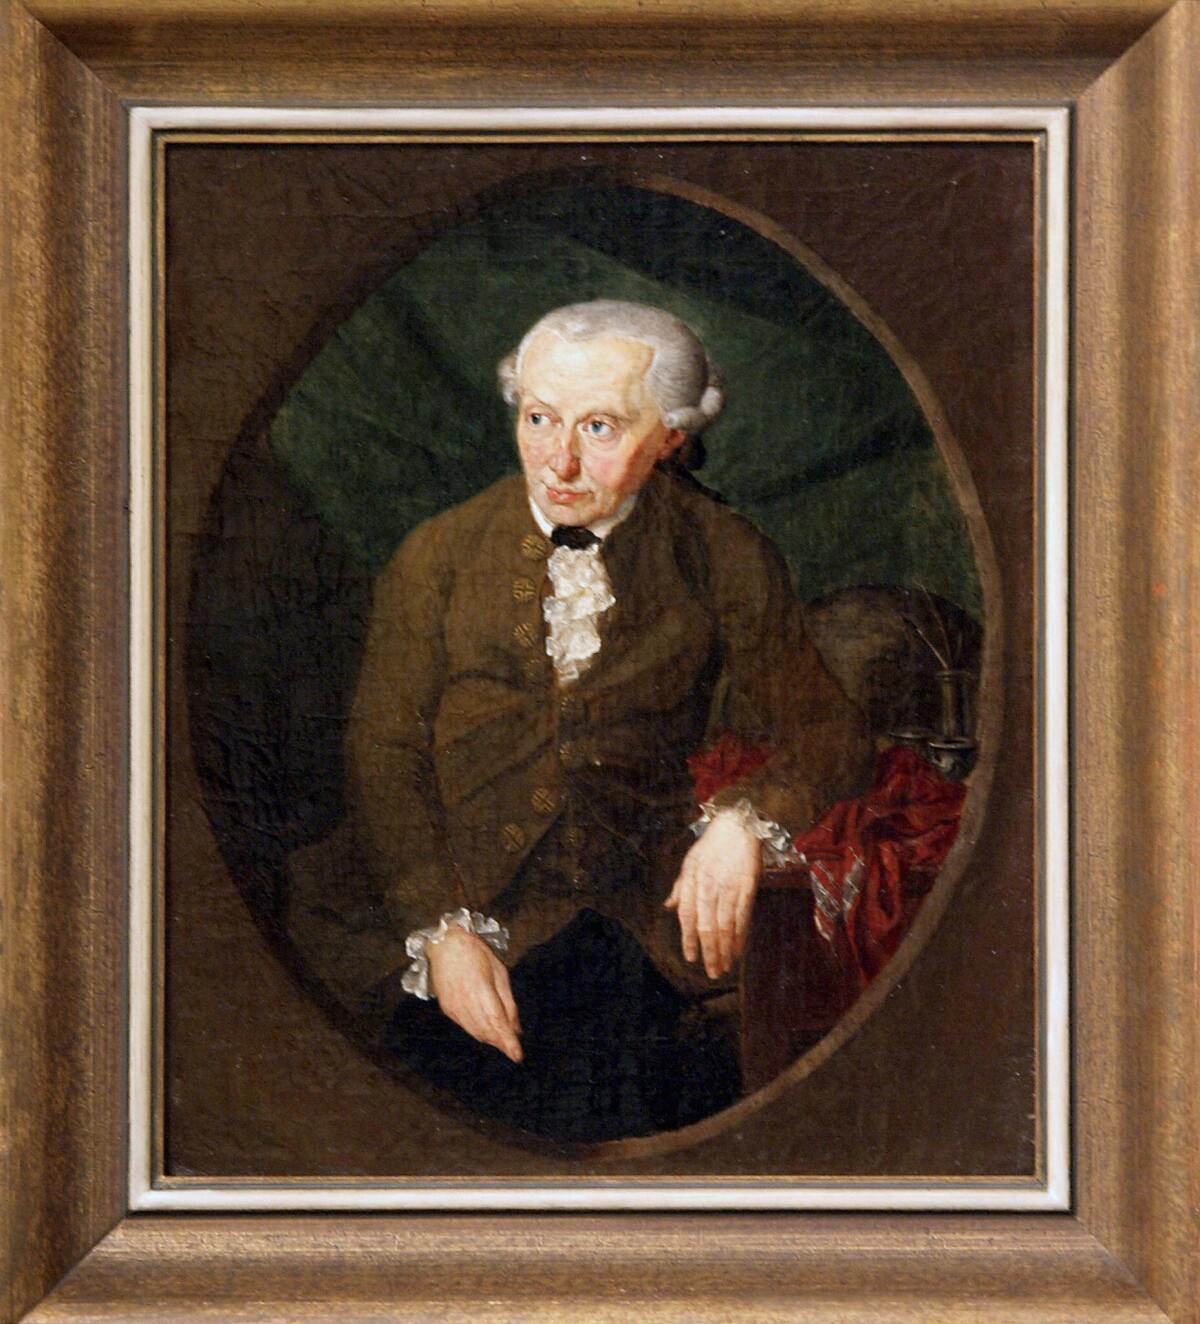 Philosopher Immanuel Kant is portrayed in a 1791 painting by Gottlieb Doebler. Kant was the subject of a heated debate in Russia this week.